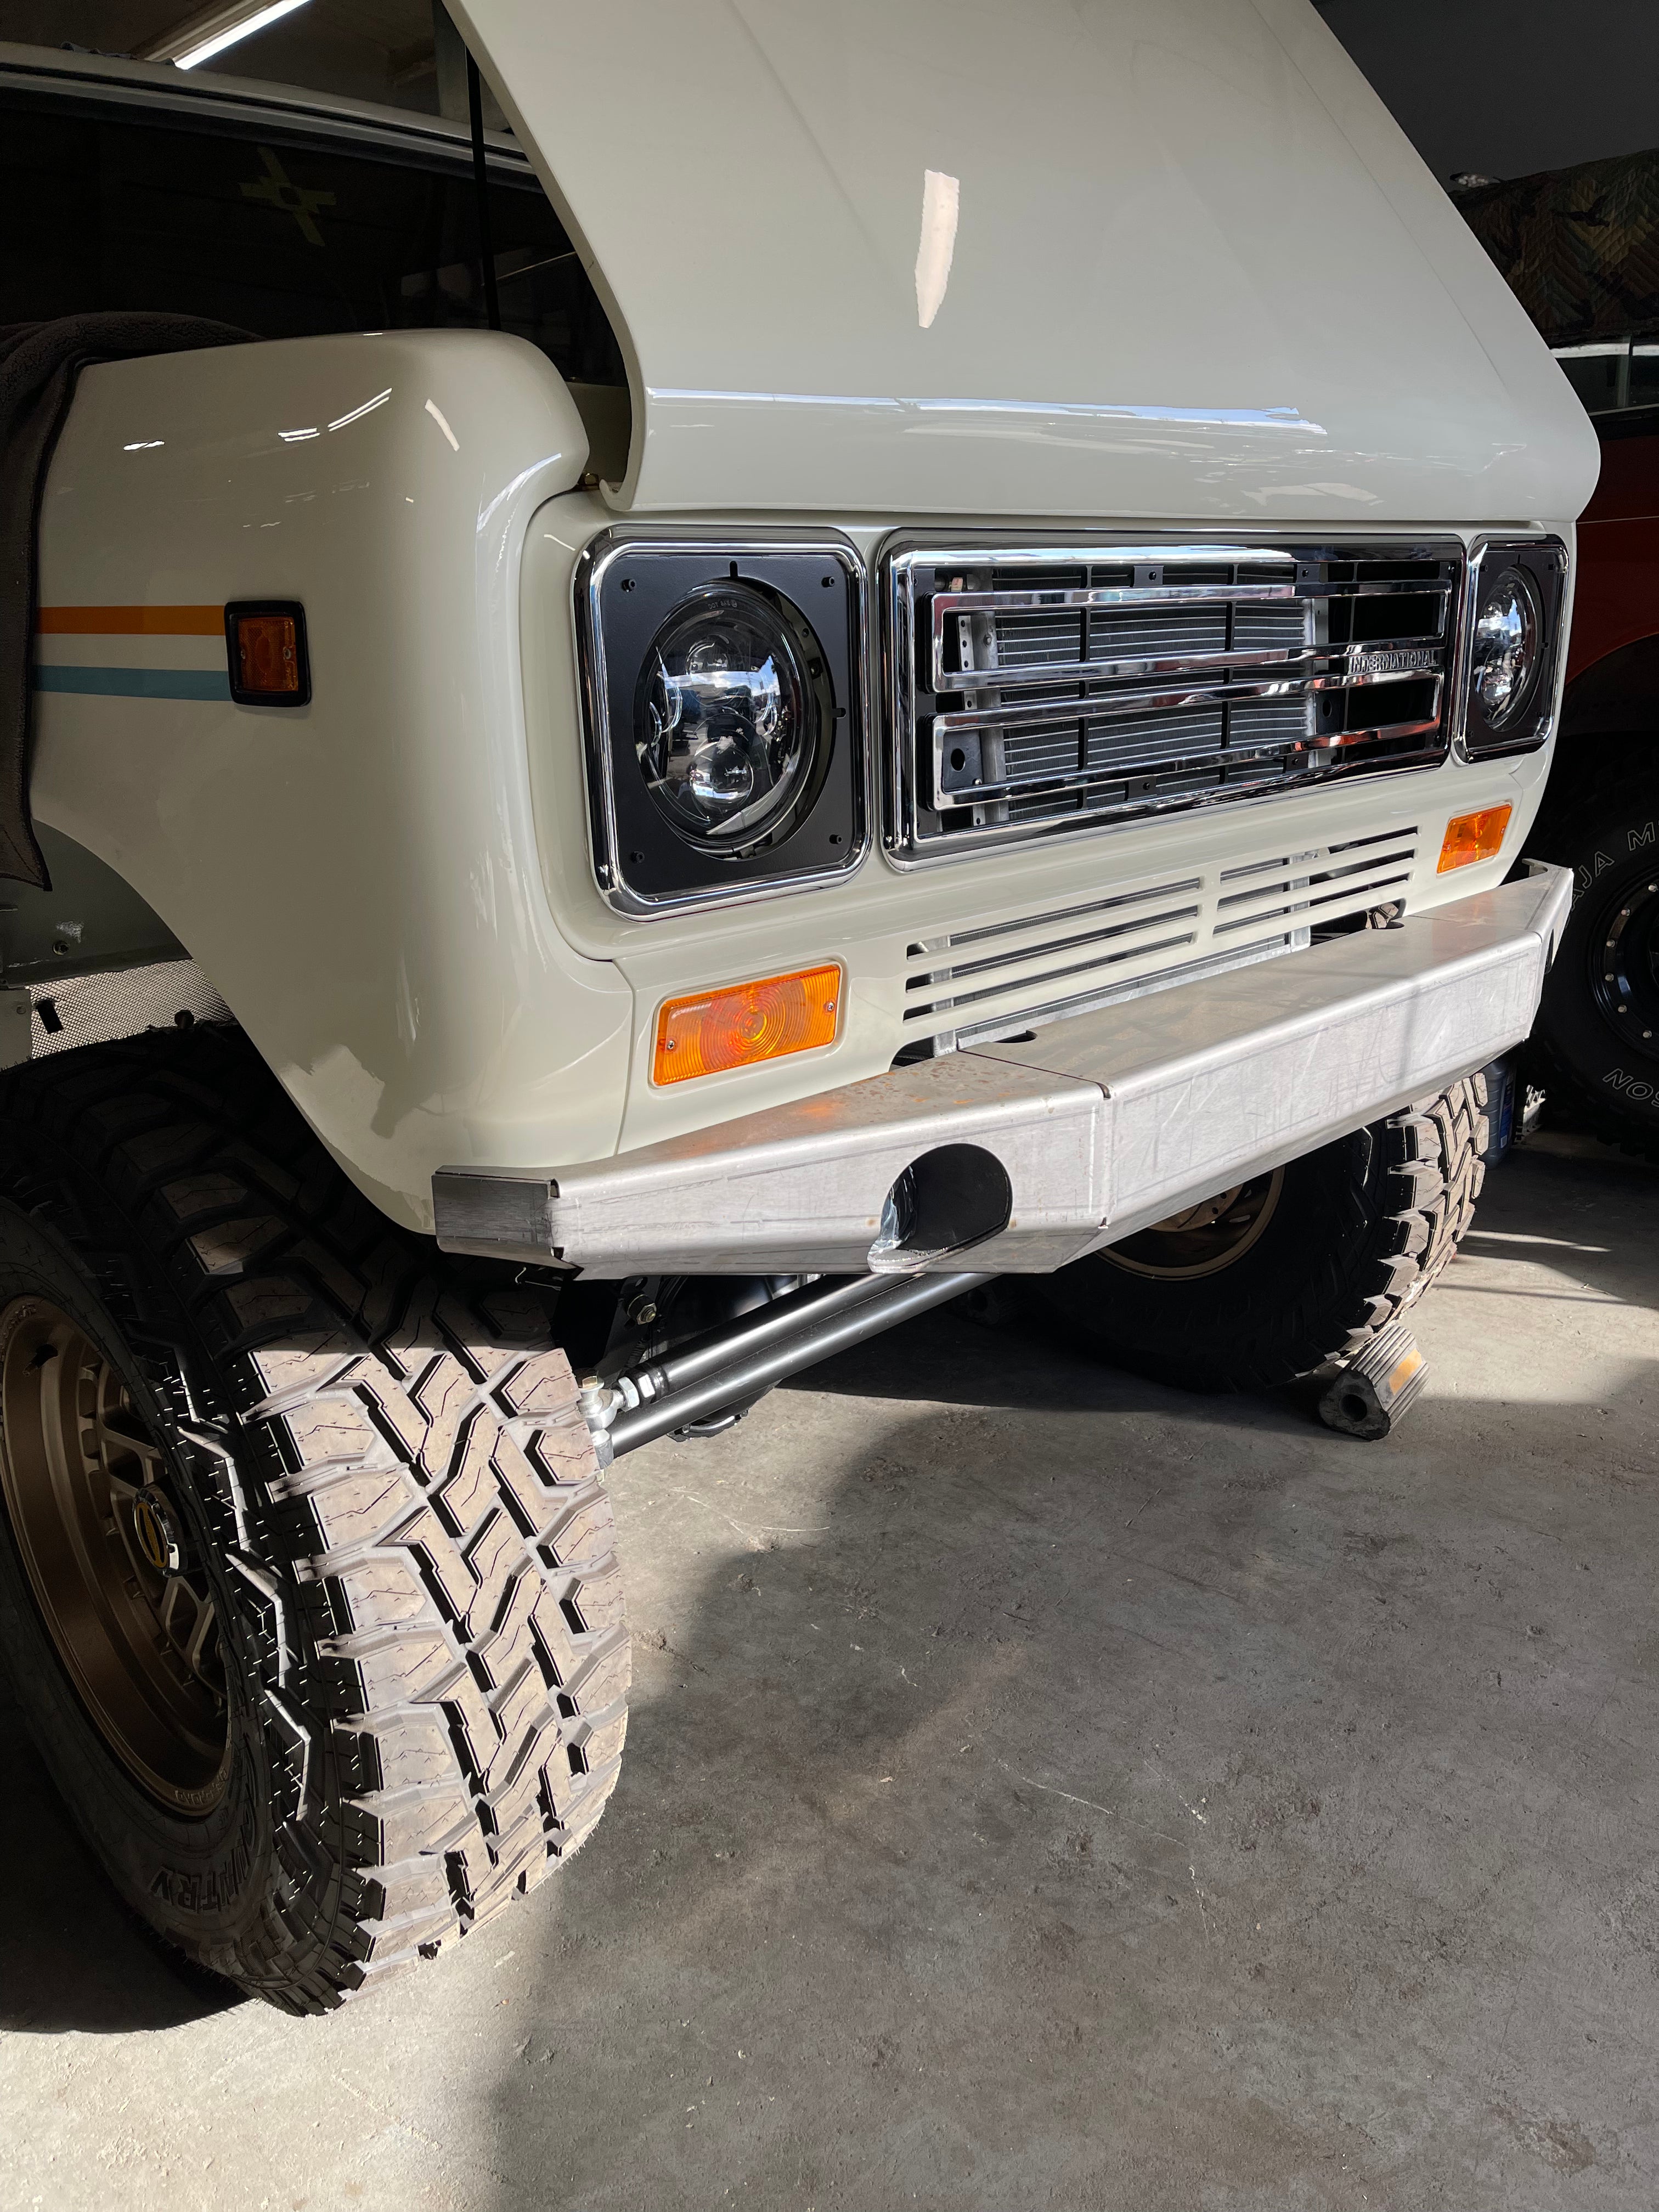 International Scout II Front Bumper with Fog Lights.  "Preorder"